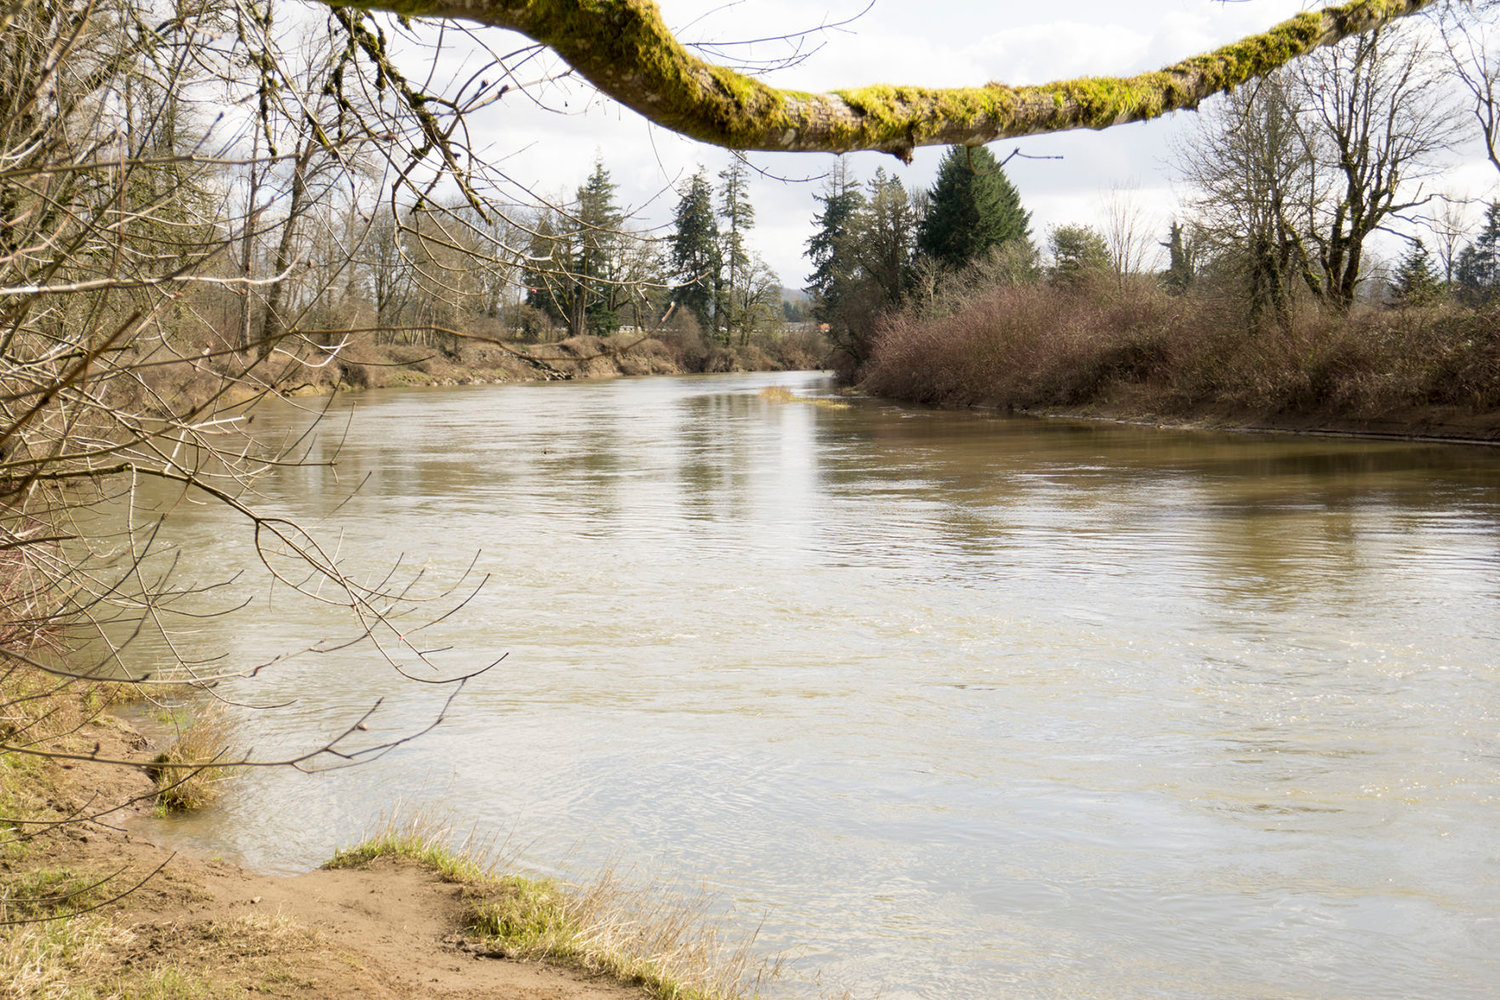 A look at where the Skookumchuck River flows into the Chehalis River